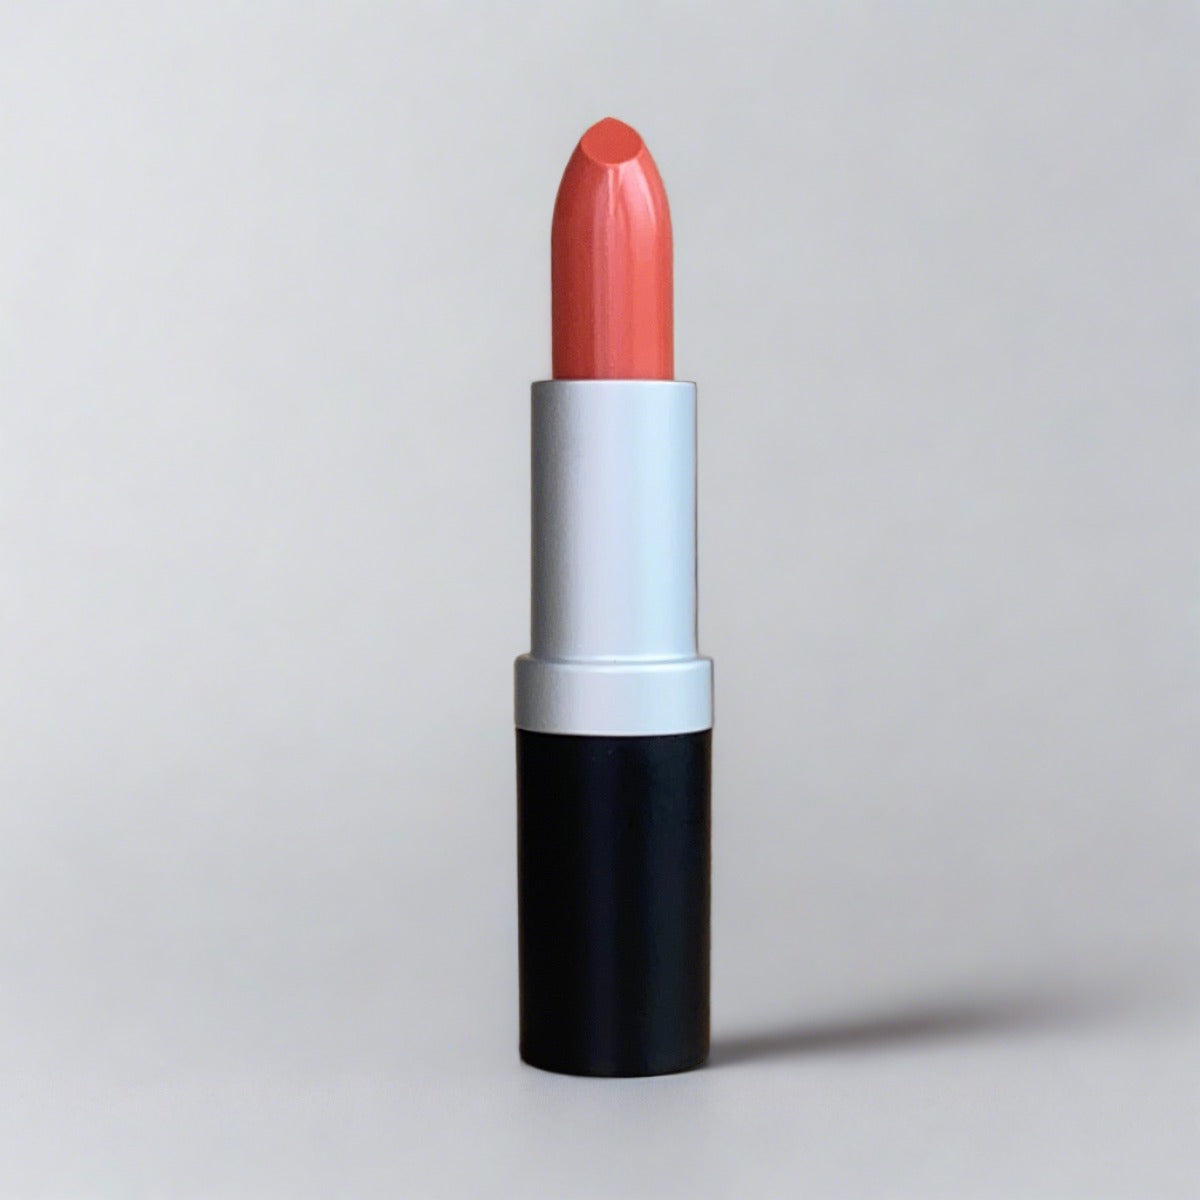 Vibrant coral lipstick for a pop of color